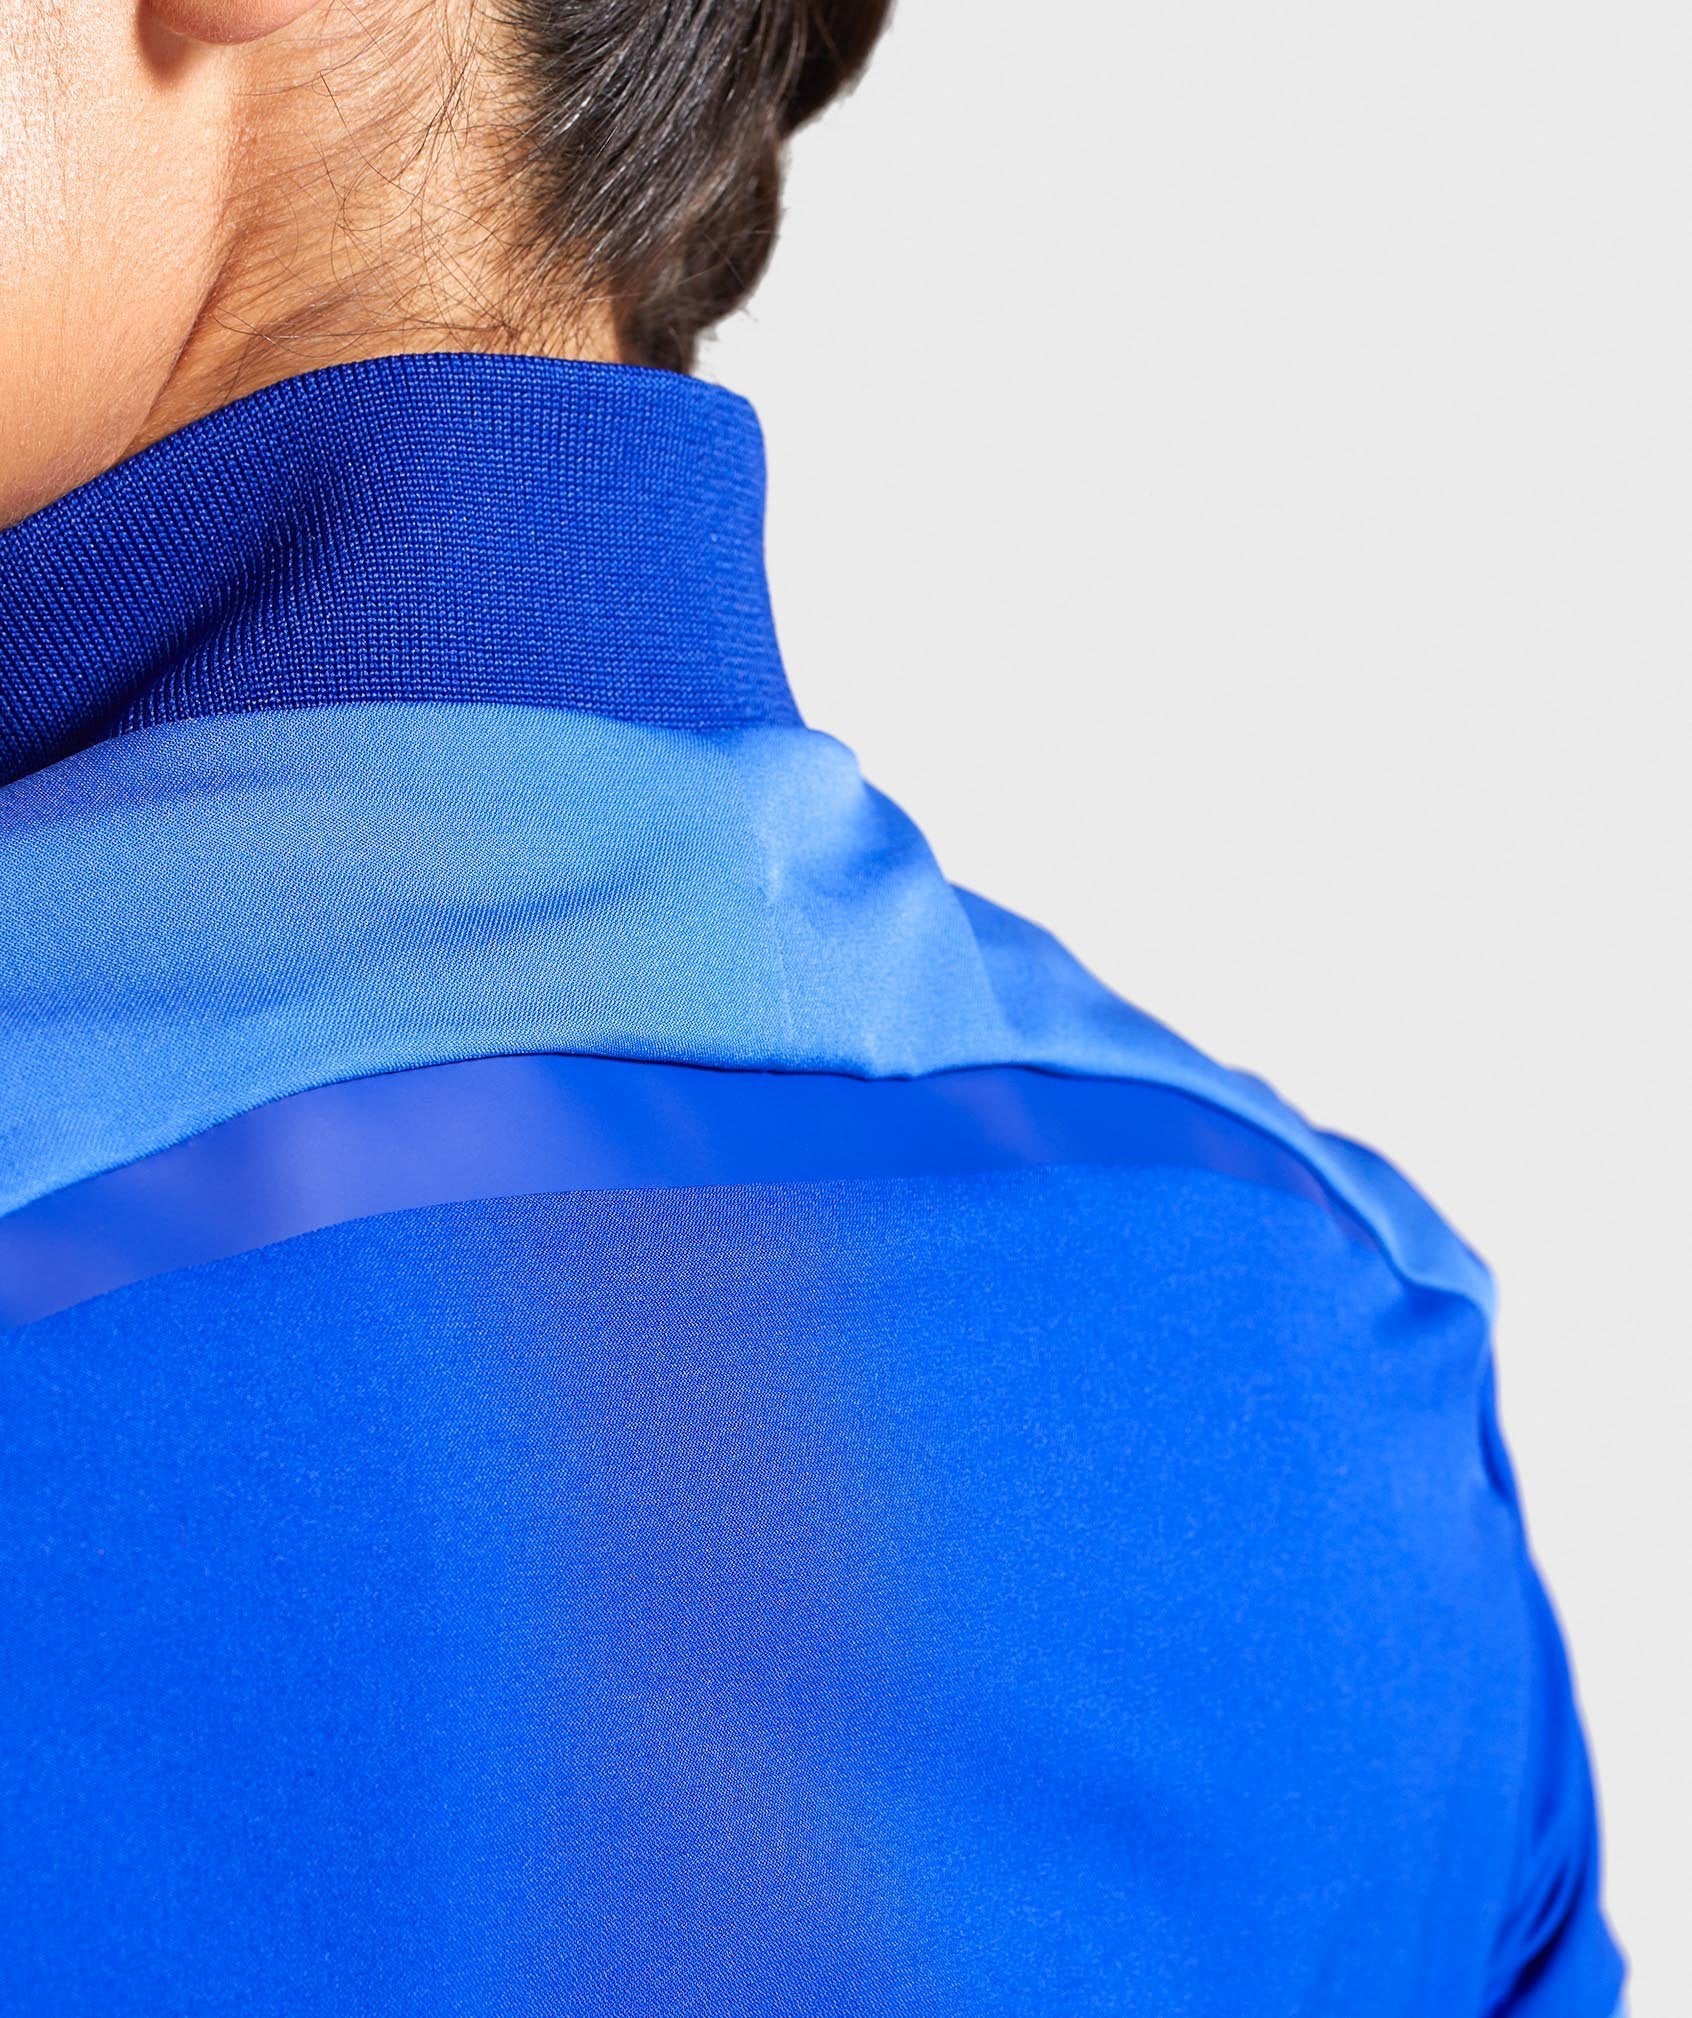 Turbo Track Jacket in Cobalt Blue - view 4